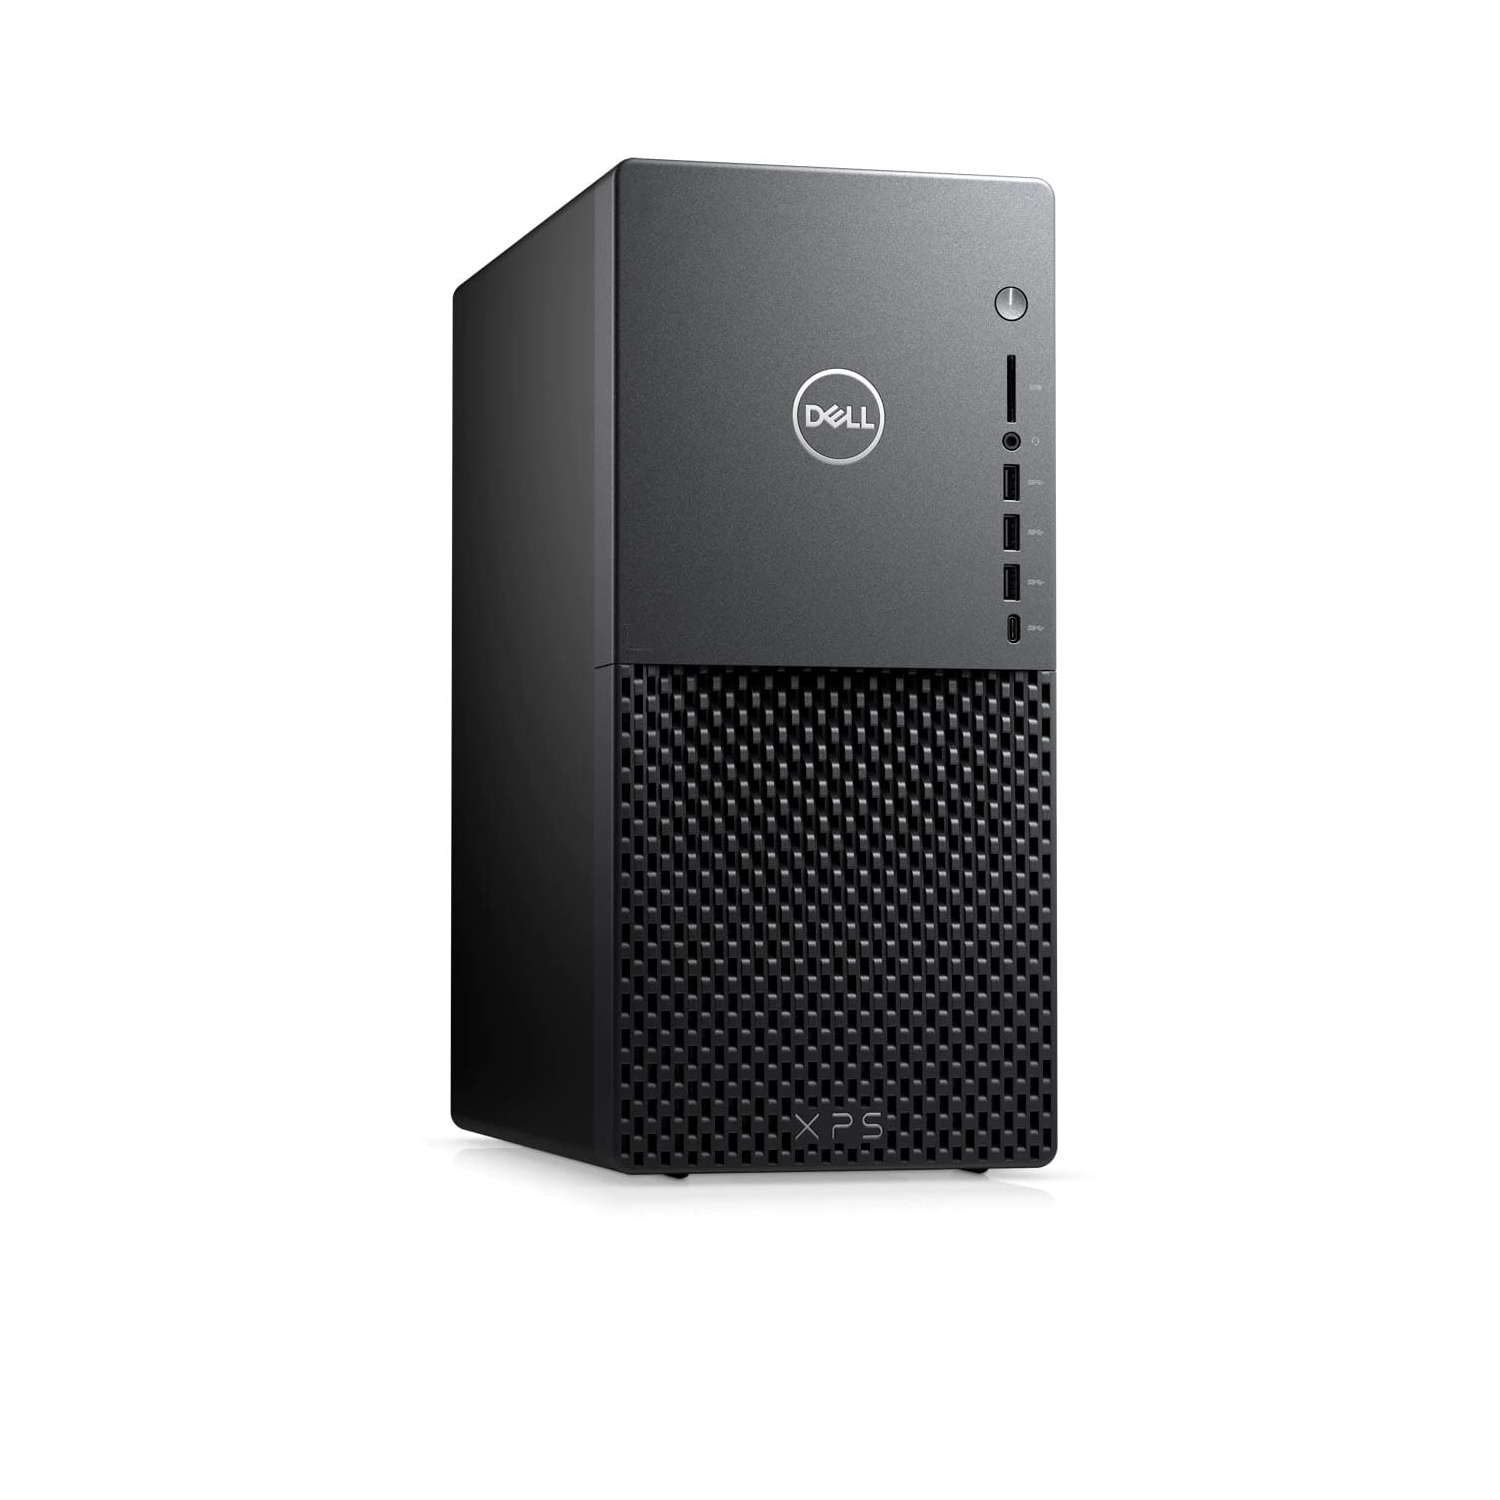 Refurbished (Excellent) - Dell XPS 8940 Desktop (2020) | Core i7 - 1TB HDD - 8GB RAM - 6700 XT | 8 Cores @ 4.9 GHz - 11th Gen CPU Certified Refurbished